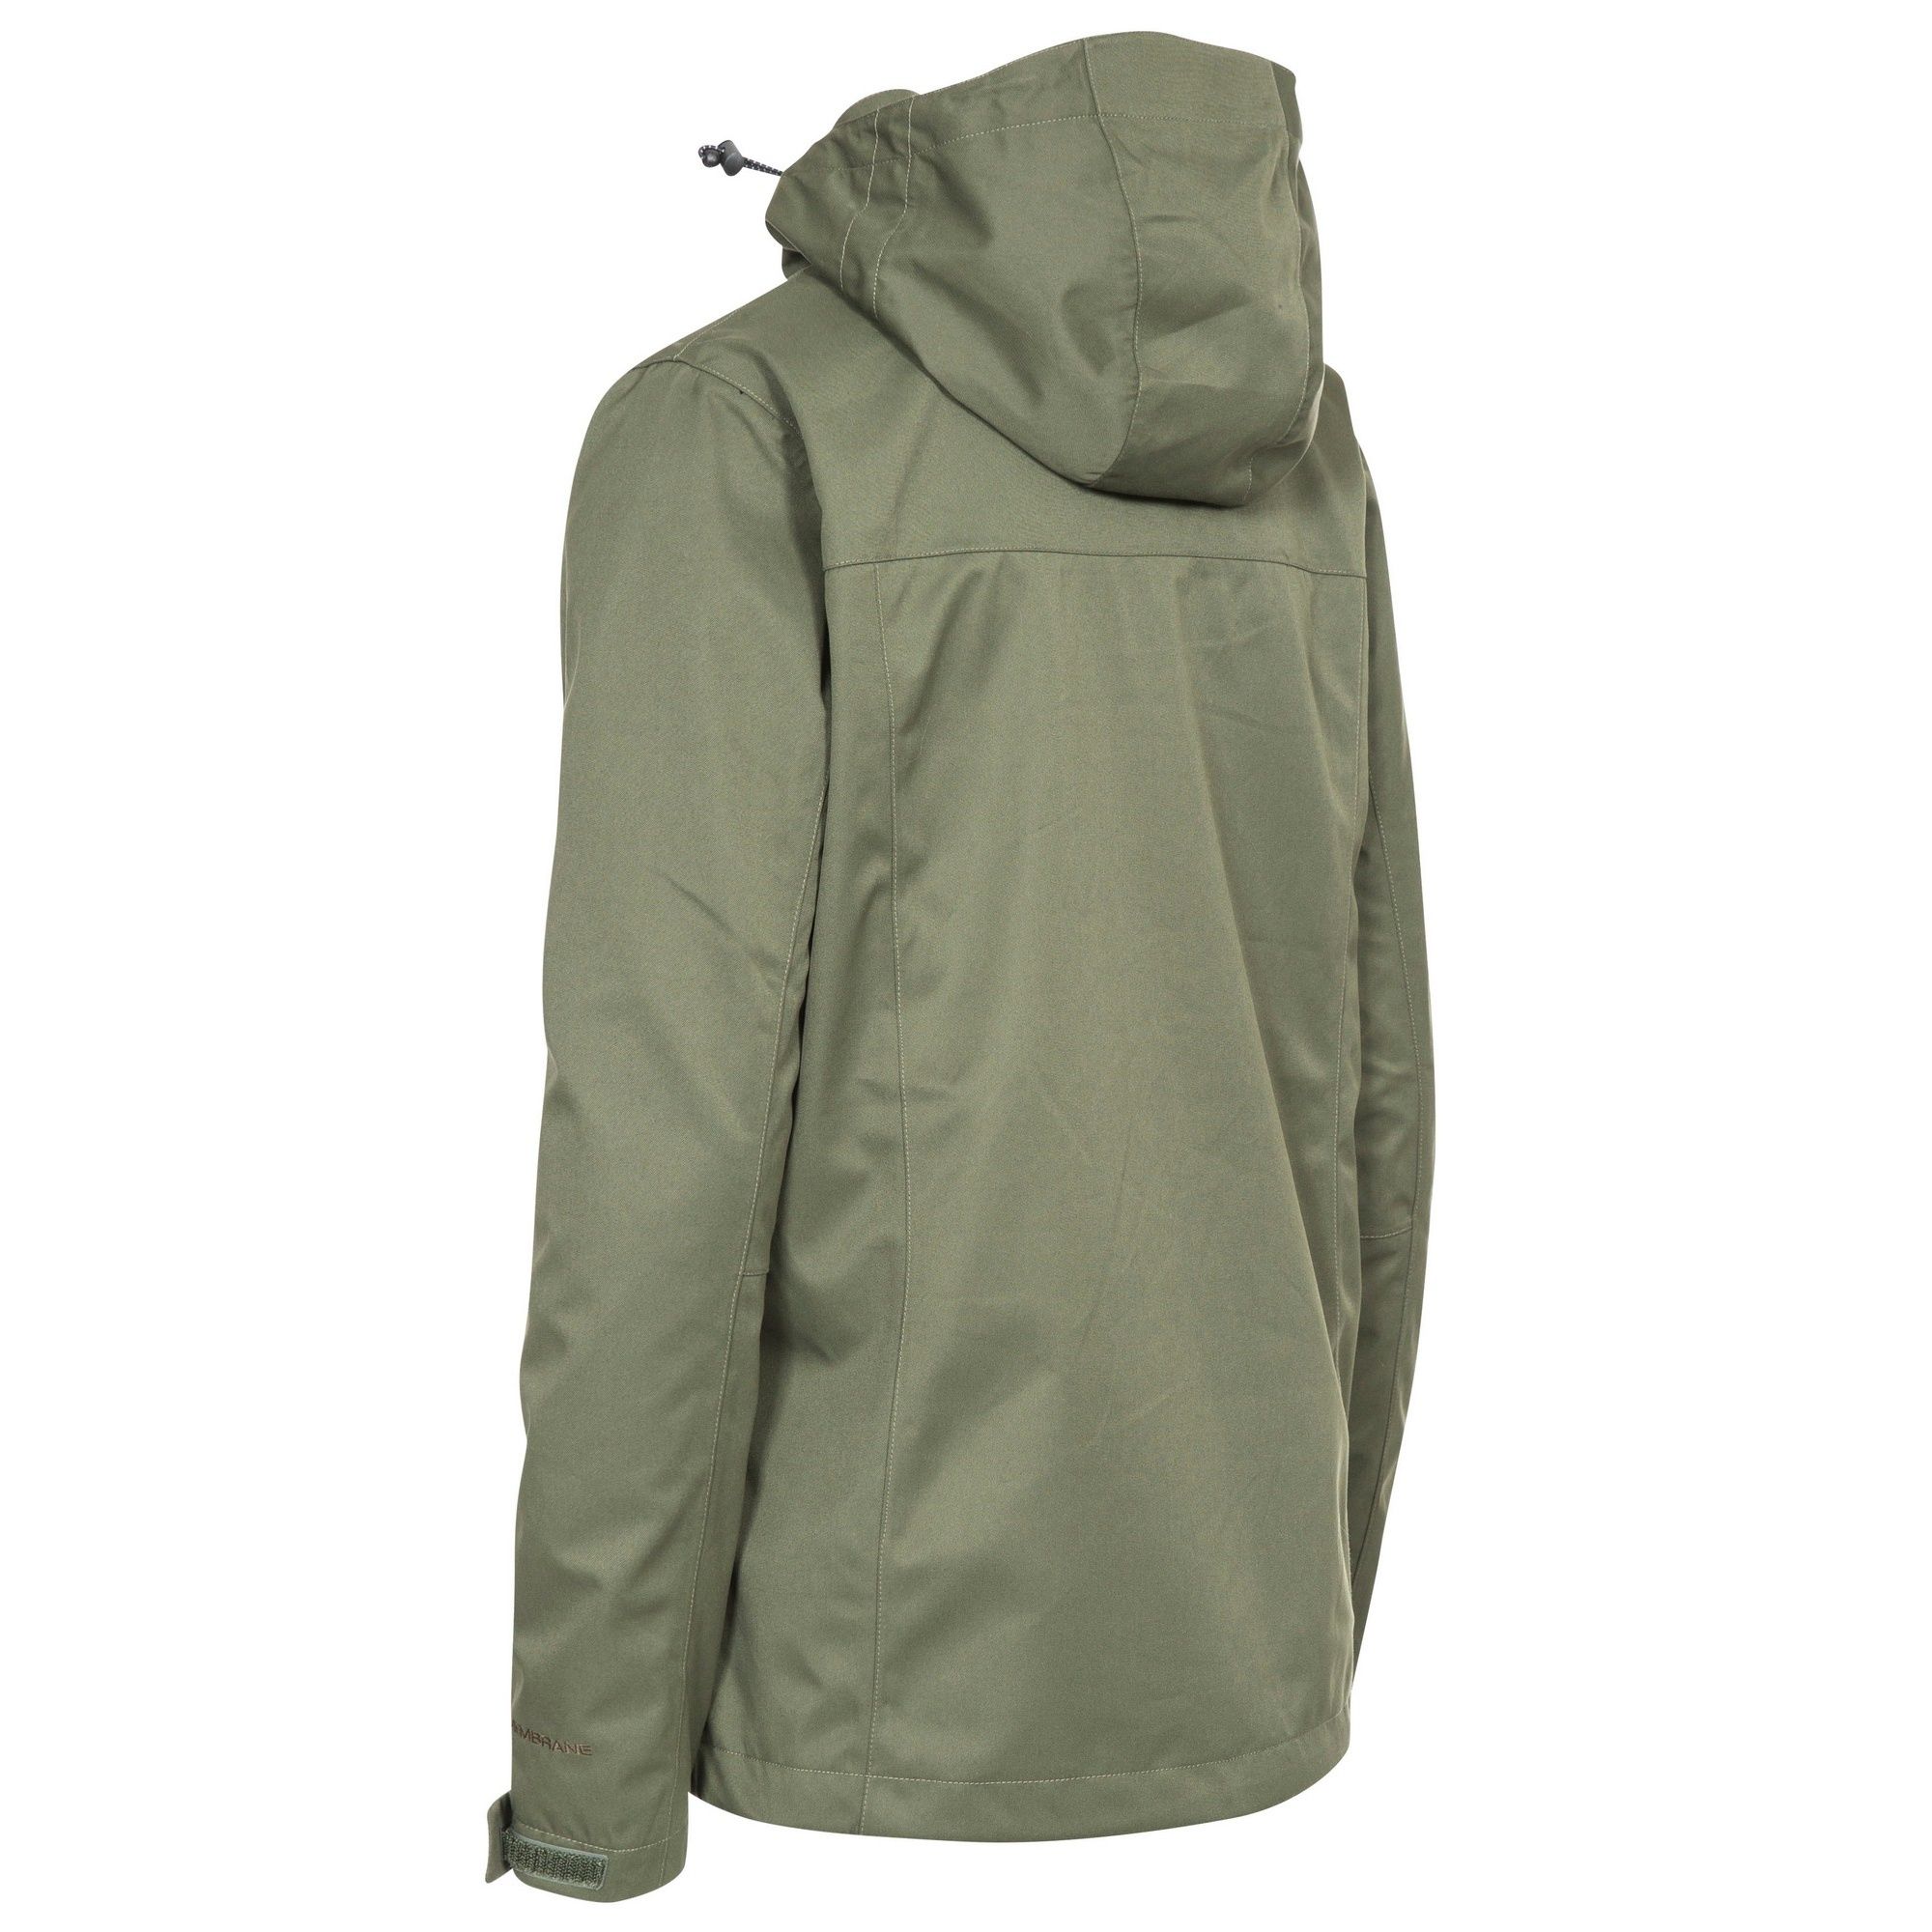 Woven. Shell - 100% polyester TPU membrane. Lining - 100% polyester. Adjustable zip off hood. Water repellent front zip. Underarm ventilation. 2 lower patch pockets. Hem drwcord with side adjuster. Cuffs with adjustable straps.